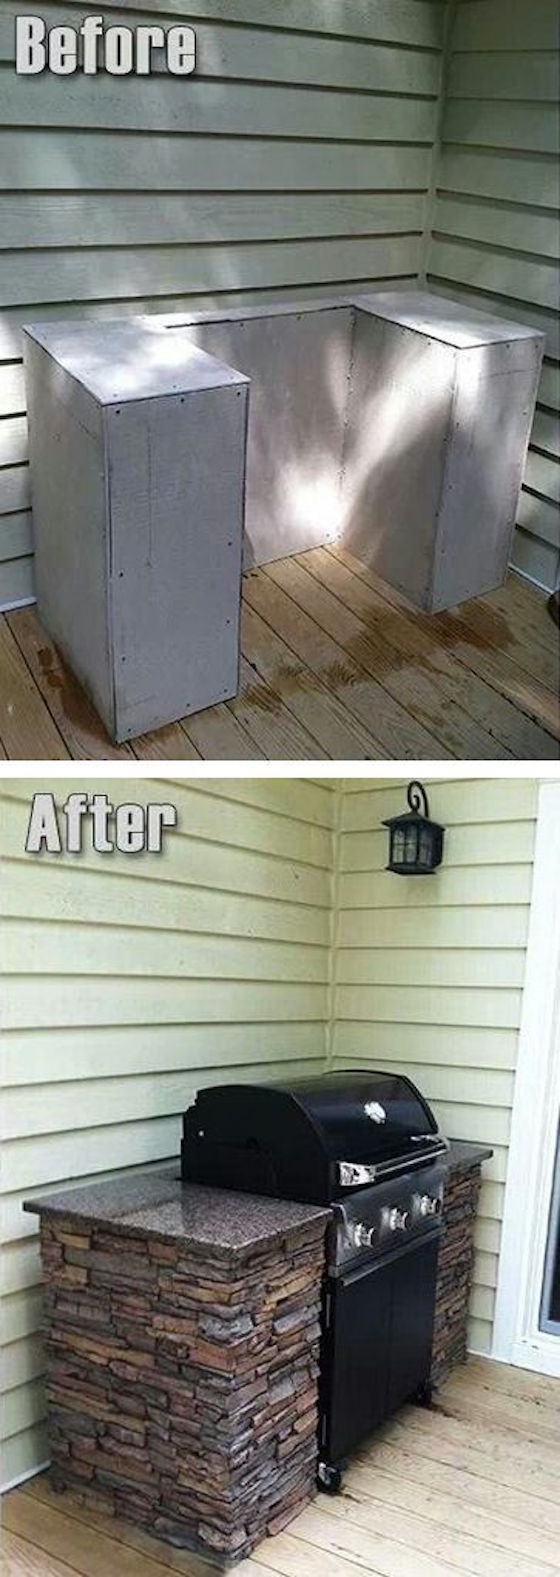 Give your deck an upgraded look with this built in grill.